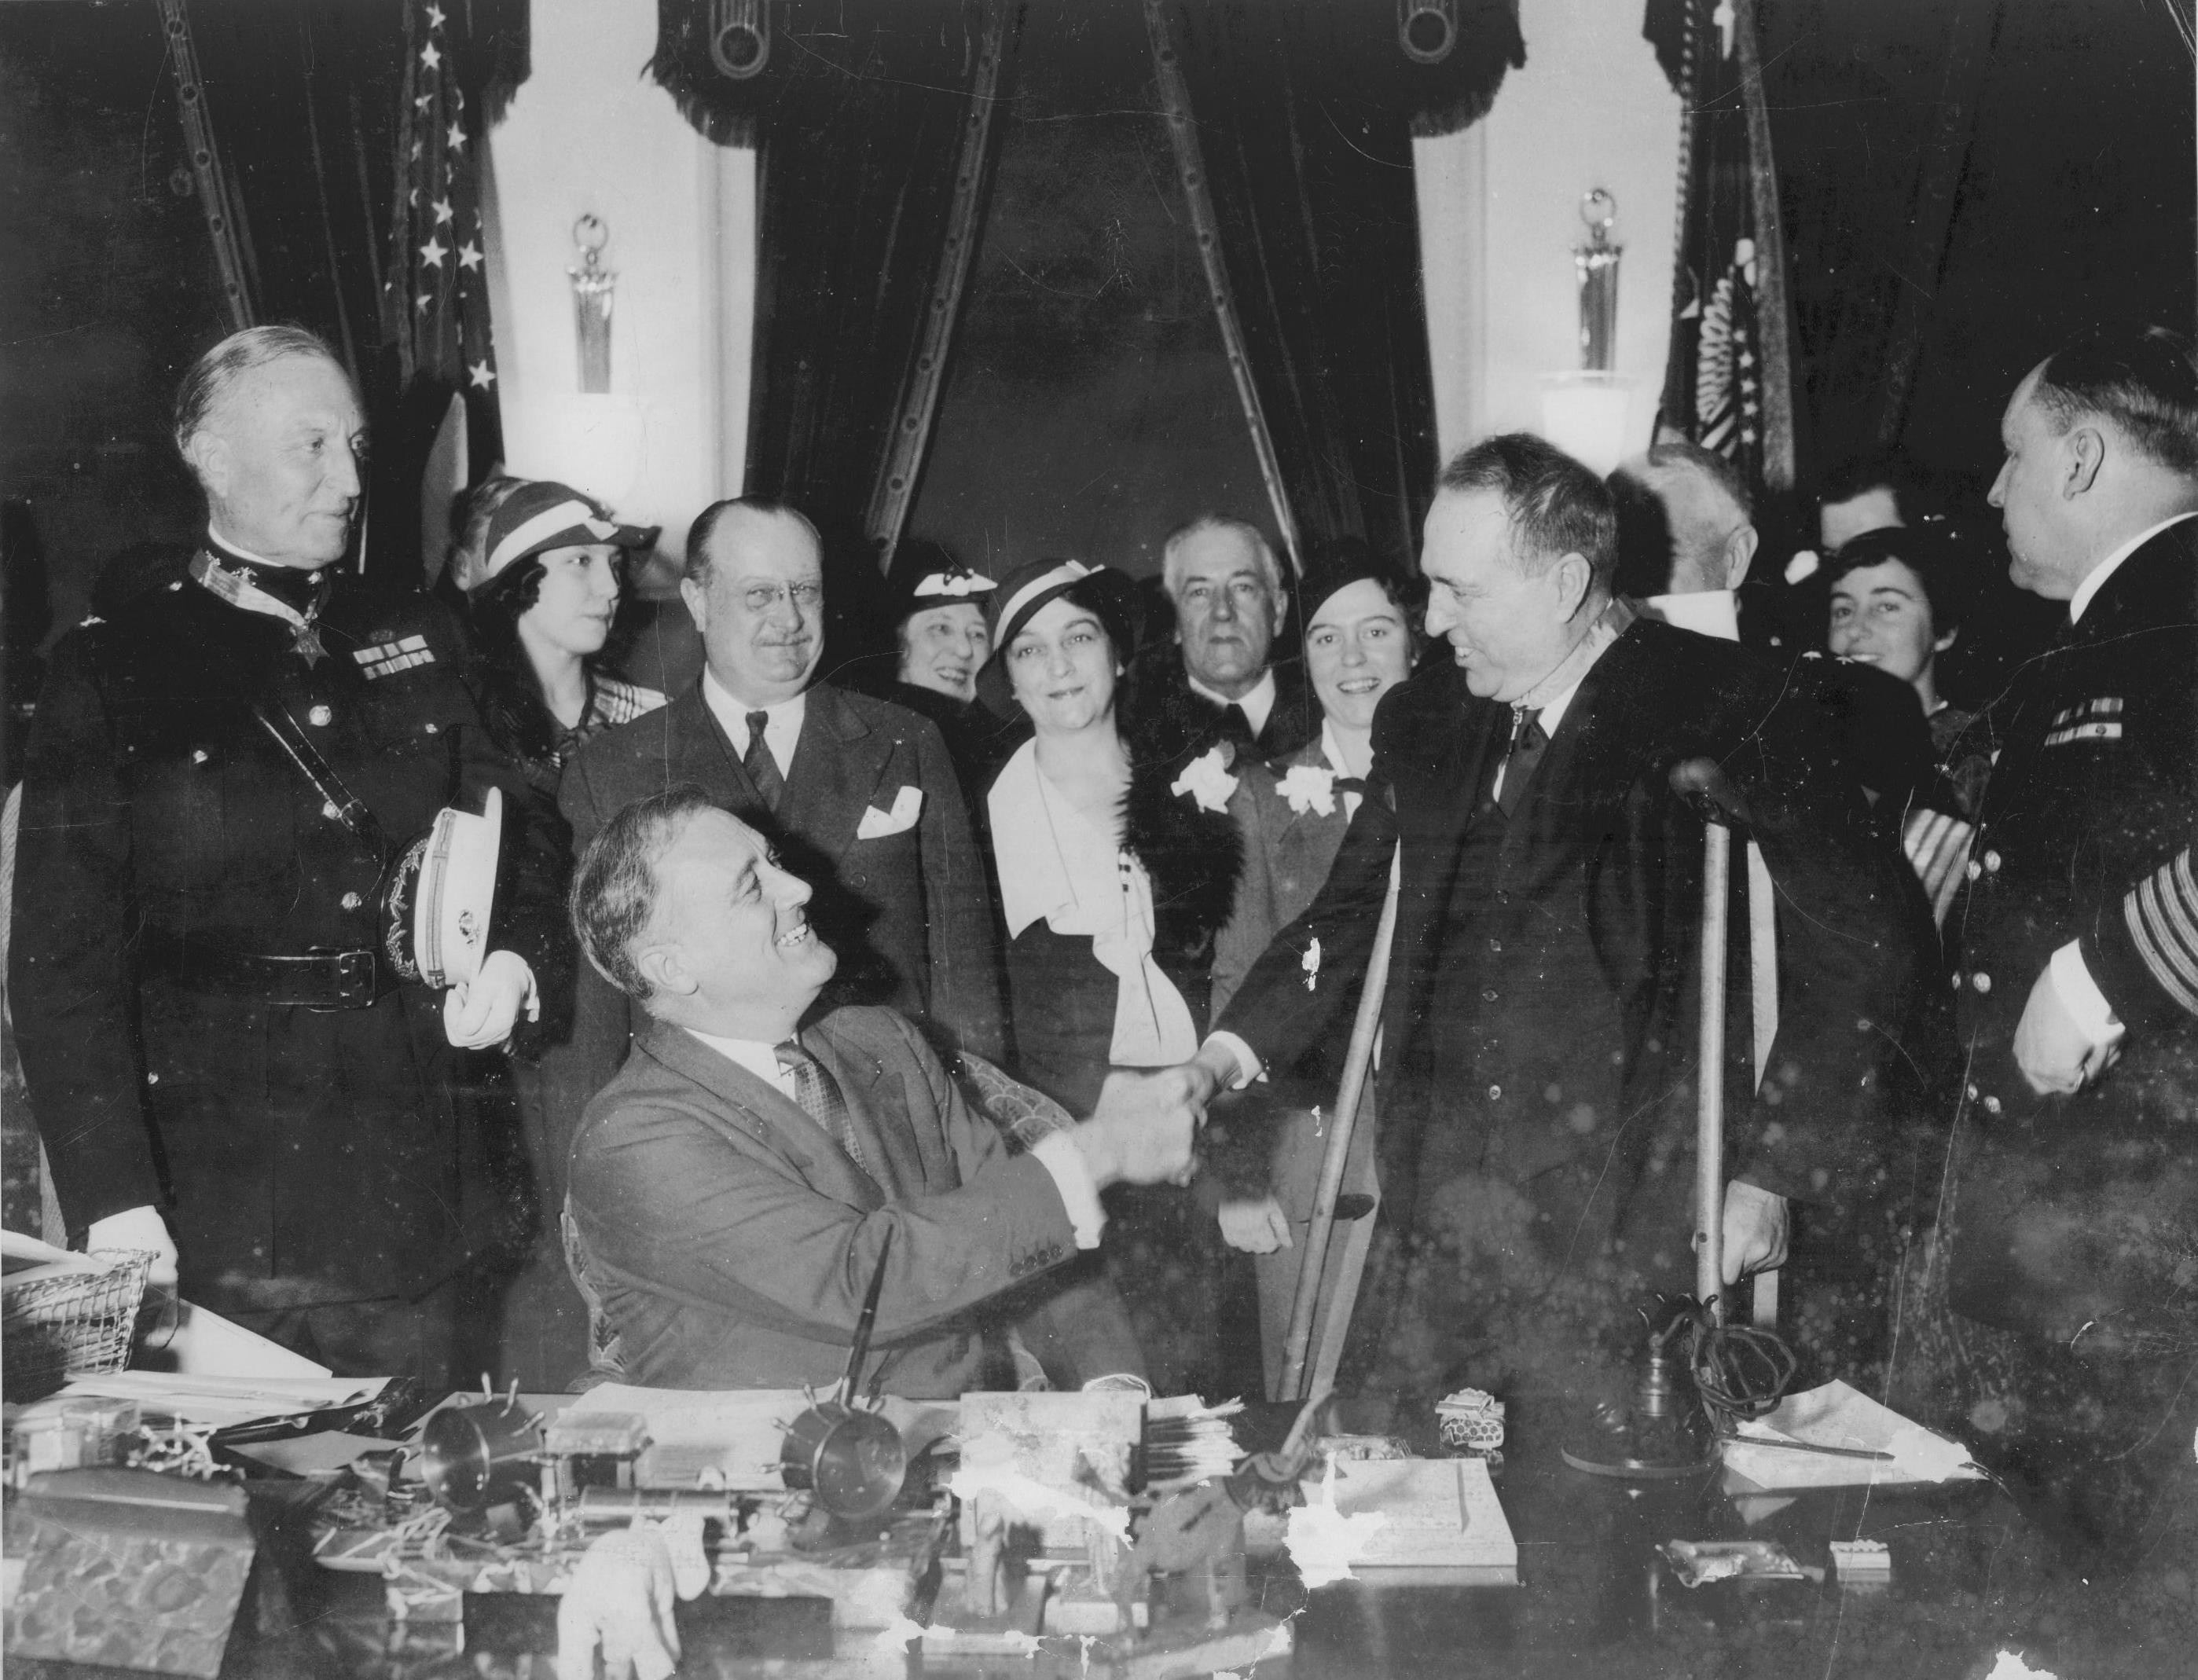 Franklin Roosevelt presenting Hiram Bearss and David Dixon Porter Medals of Honor, White House, Washington DC, United States, 25 Apr 1934